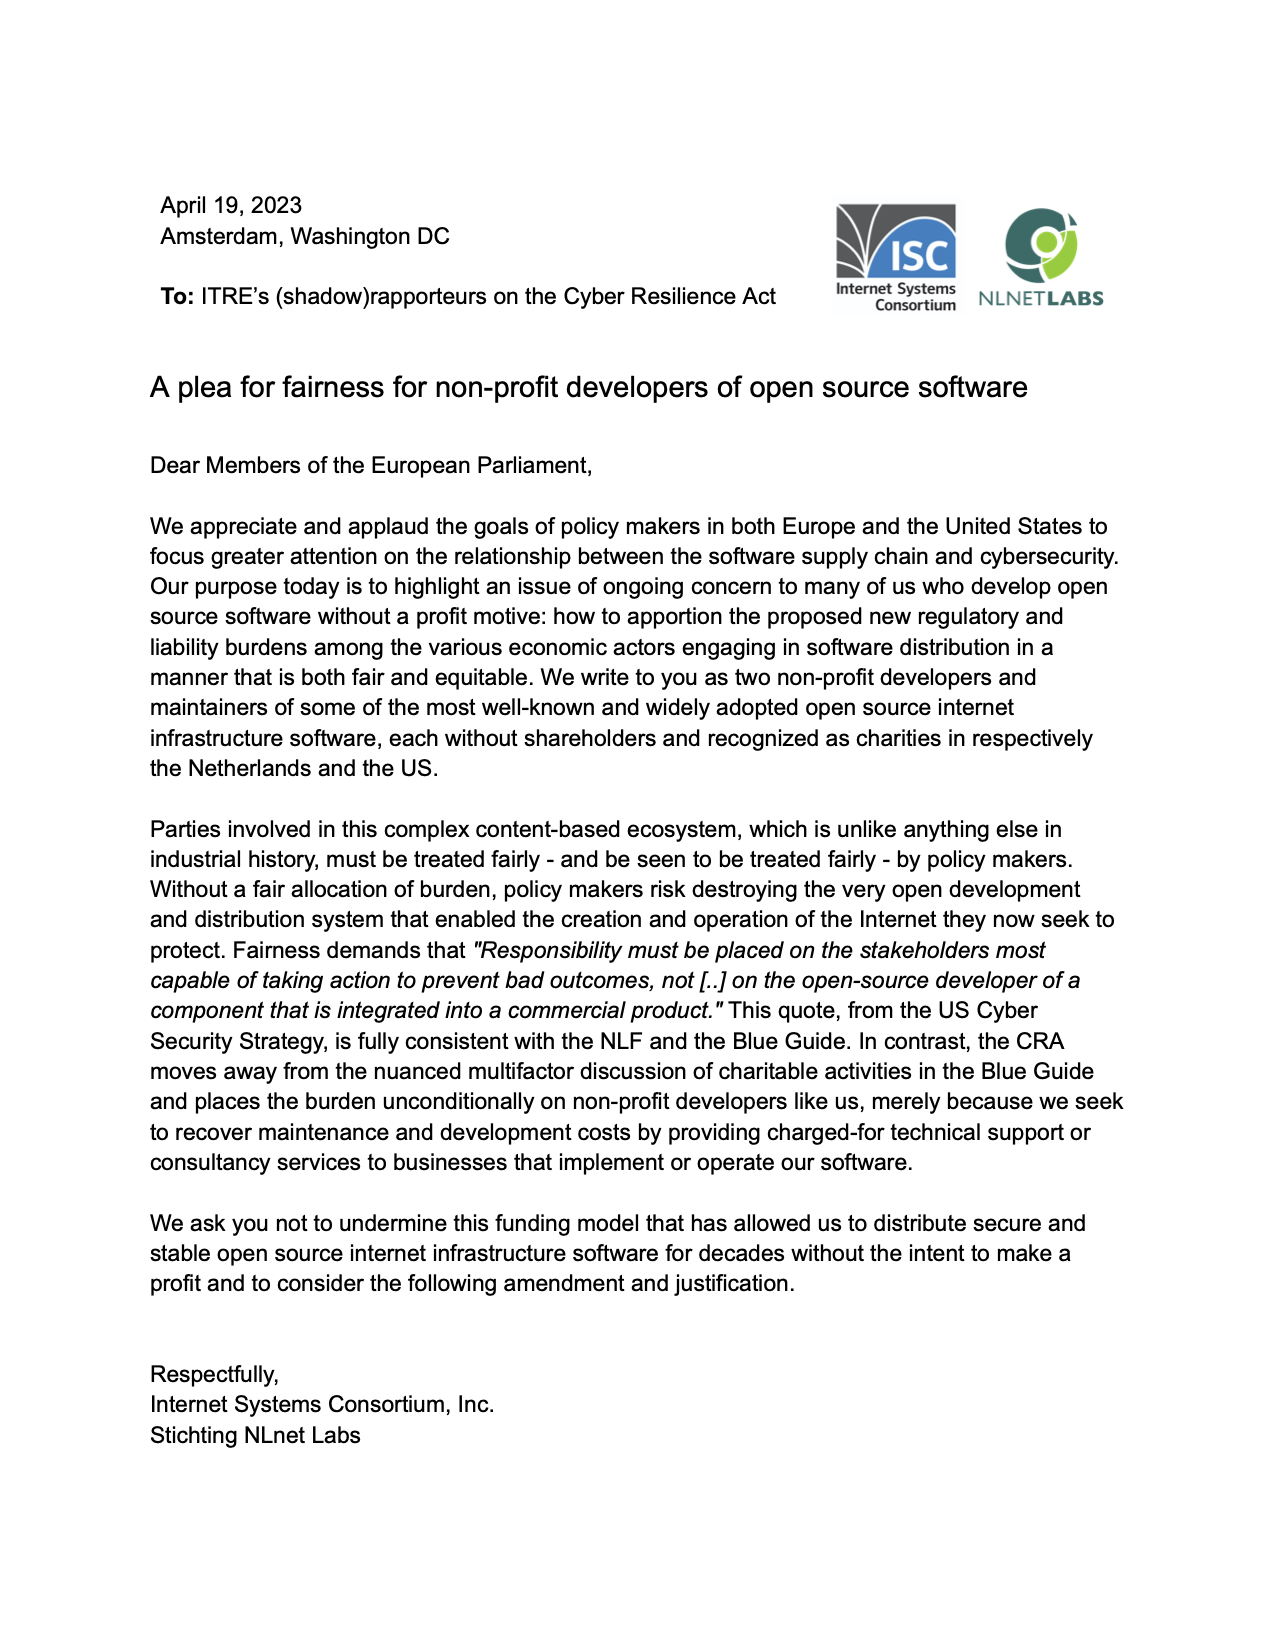 Joint letter from ISC and NLnet Labs to ITRE committee of the European Parliament Regarding the EU Cyber Resilience Act